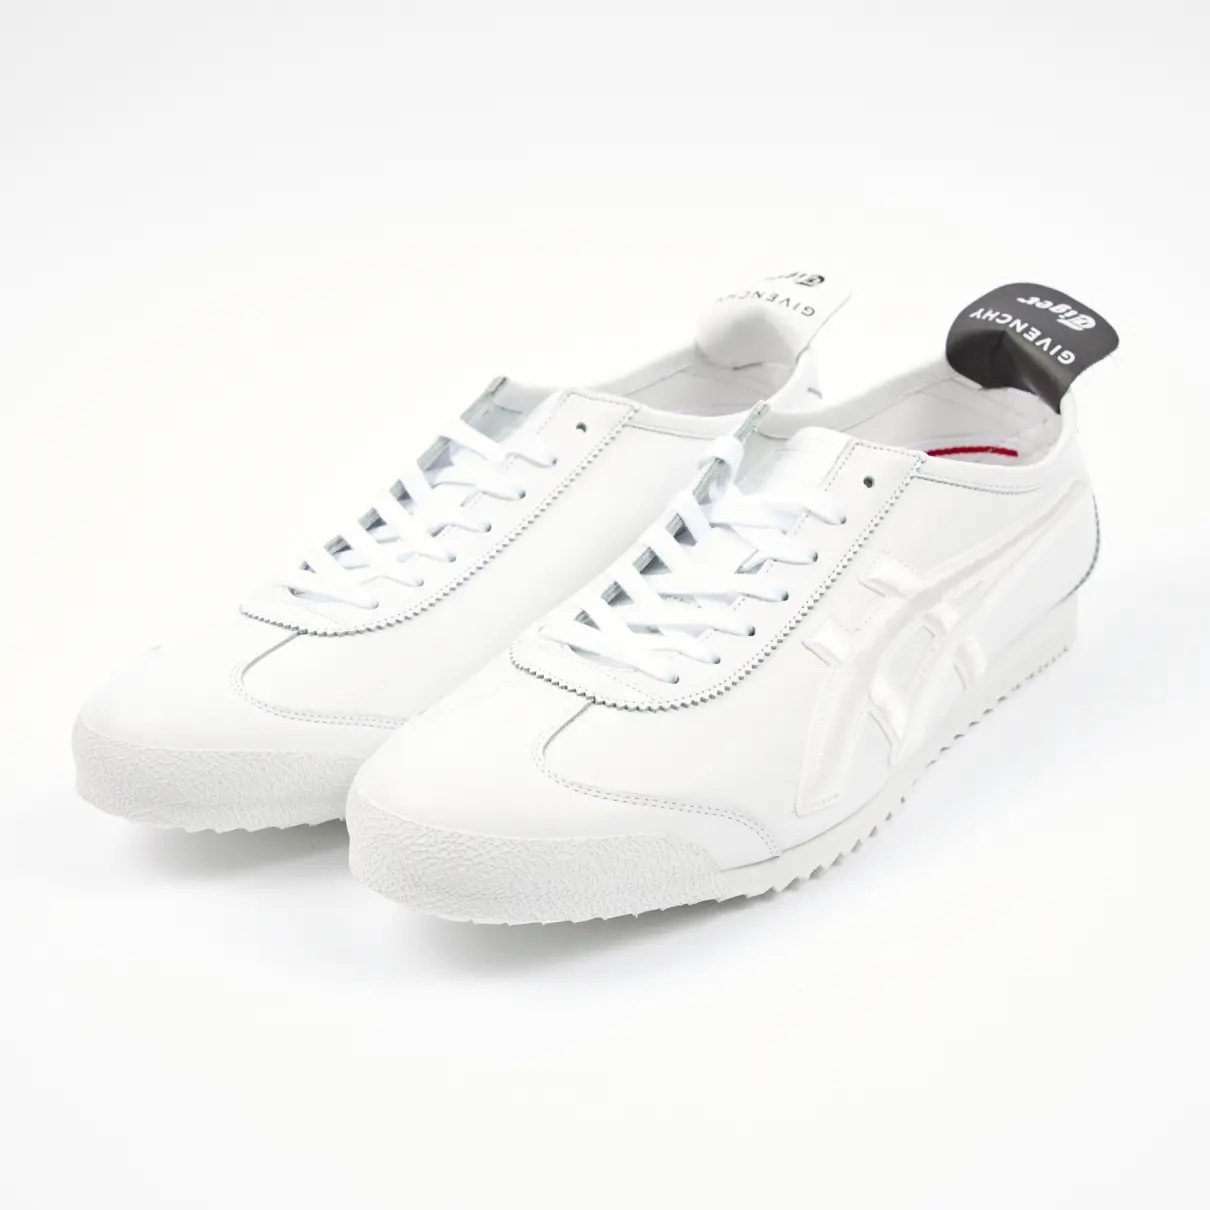 Givenchy x Tiger Leather trainers for sale